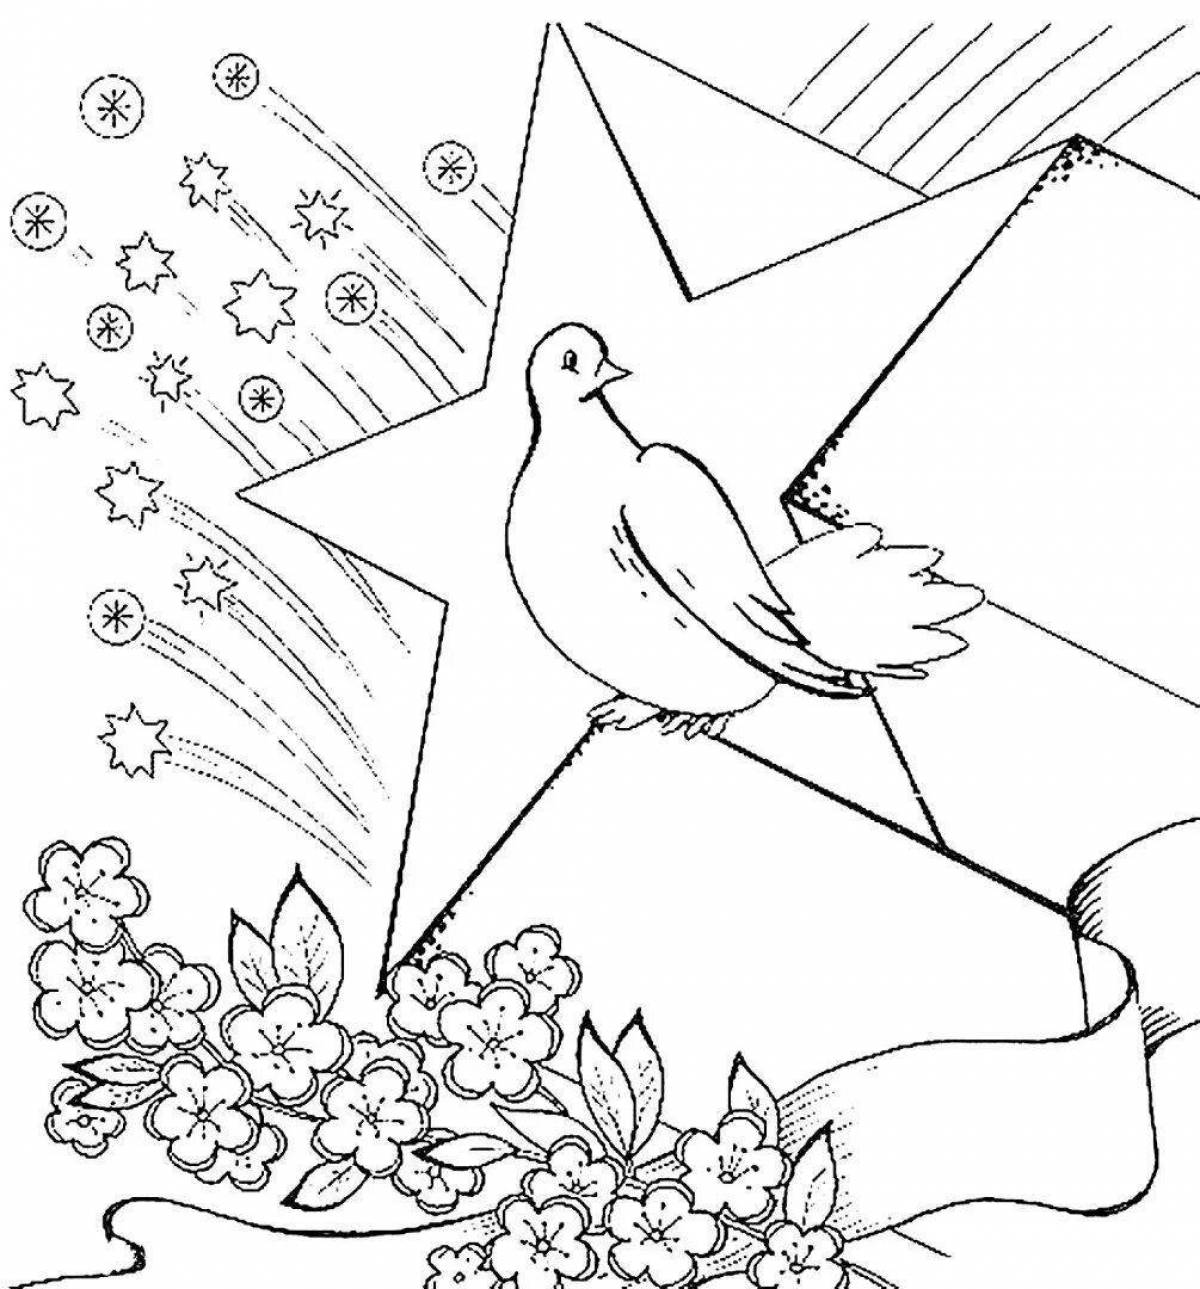 Coloring page soldier shining with dove